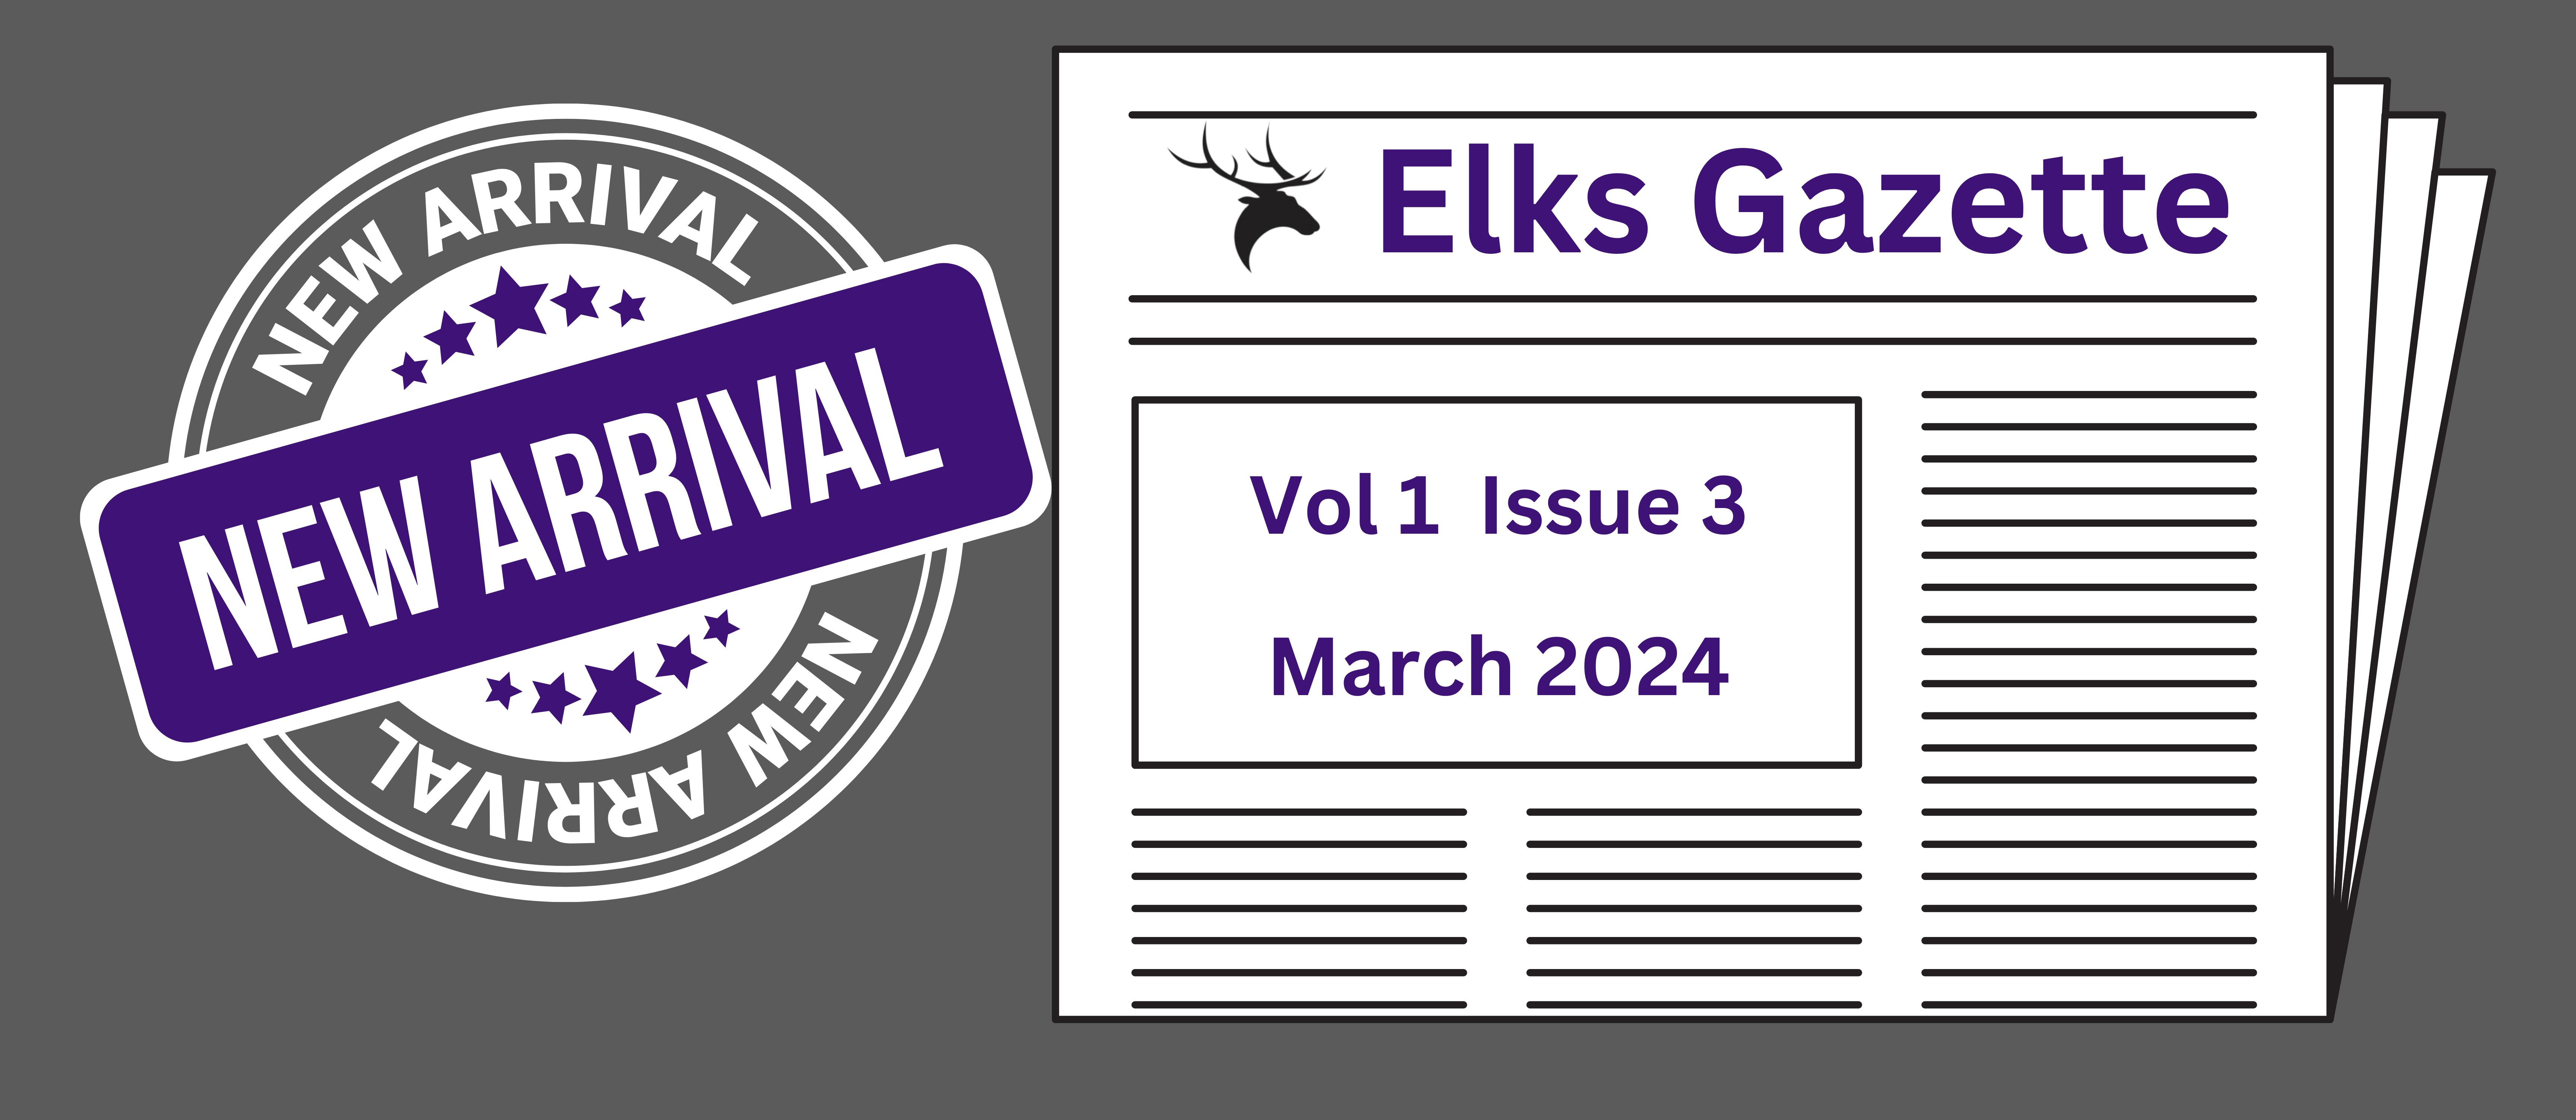 New Arrival! Elks Gazette Vol 1 Issue 3, March 2024